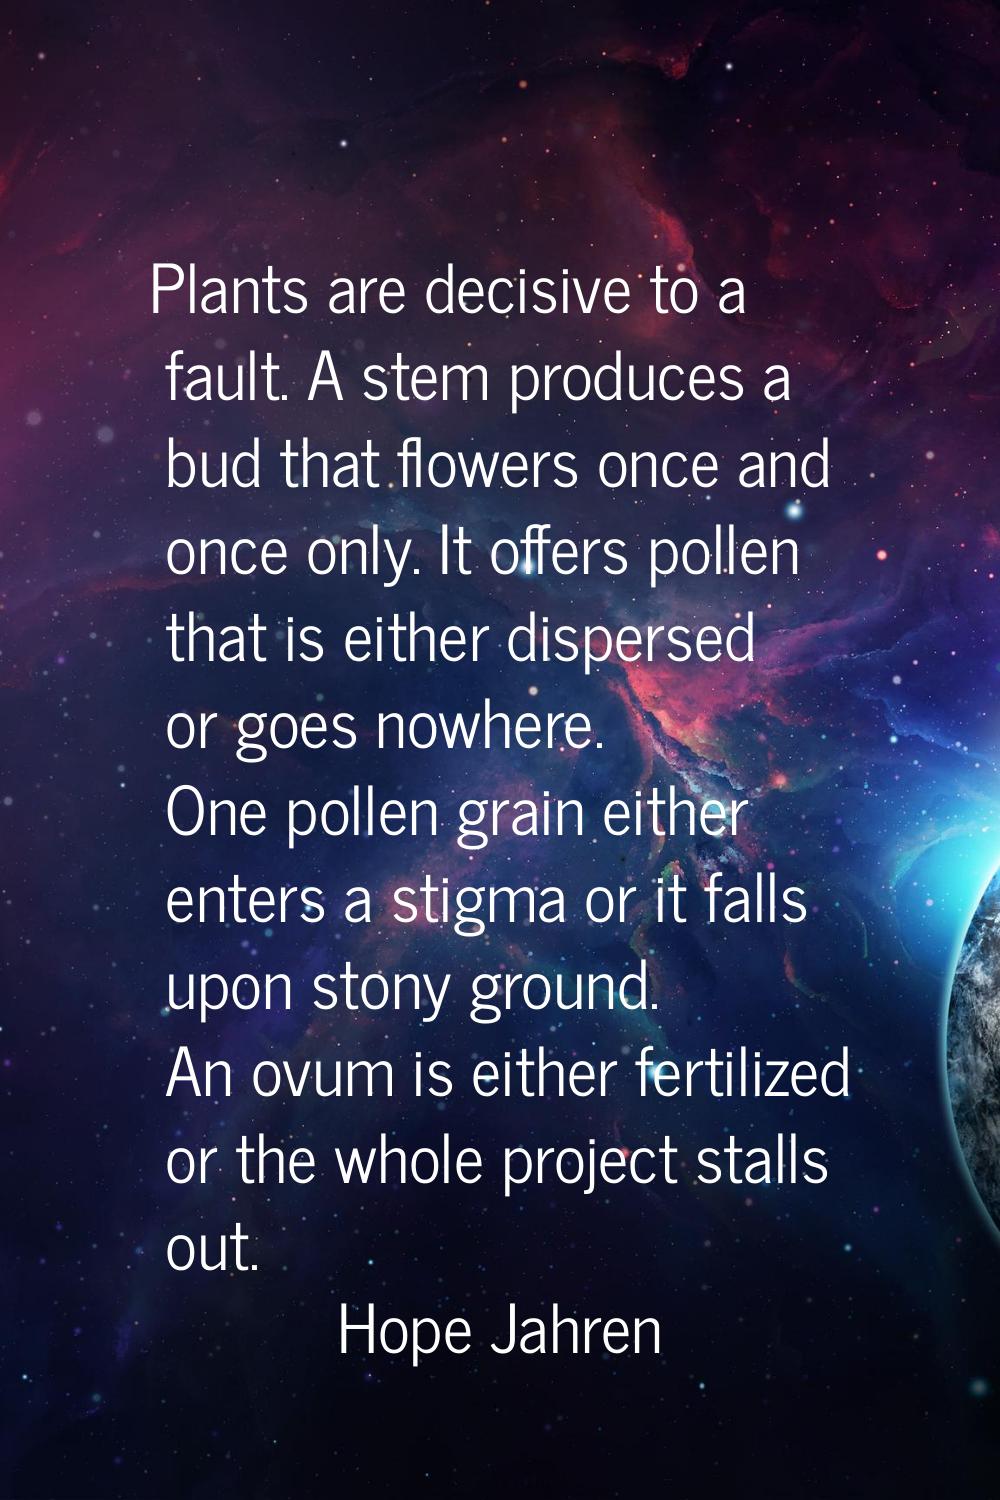 Plants are decisive to a fault. A stem produces a bud that flowers once and once only. It offers po